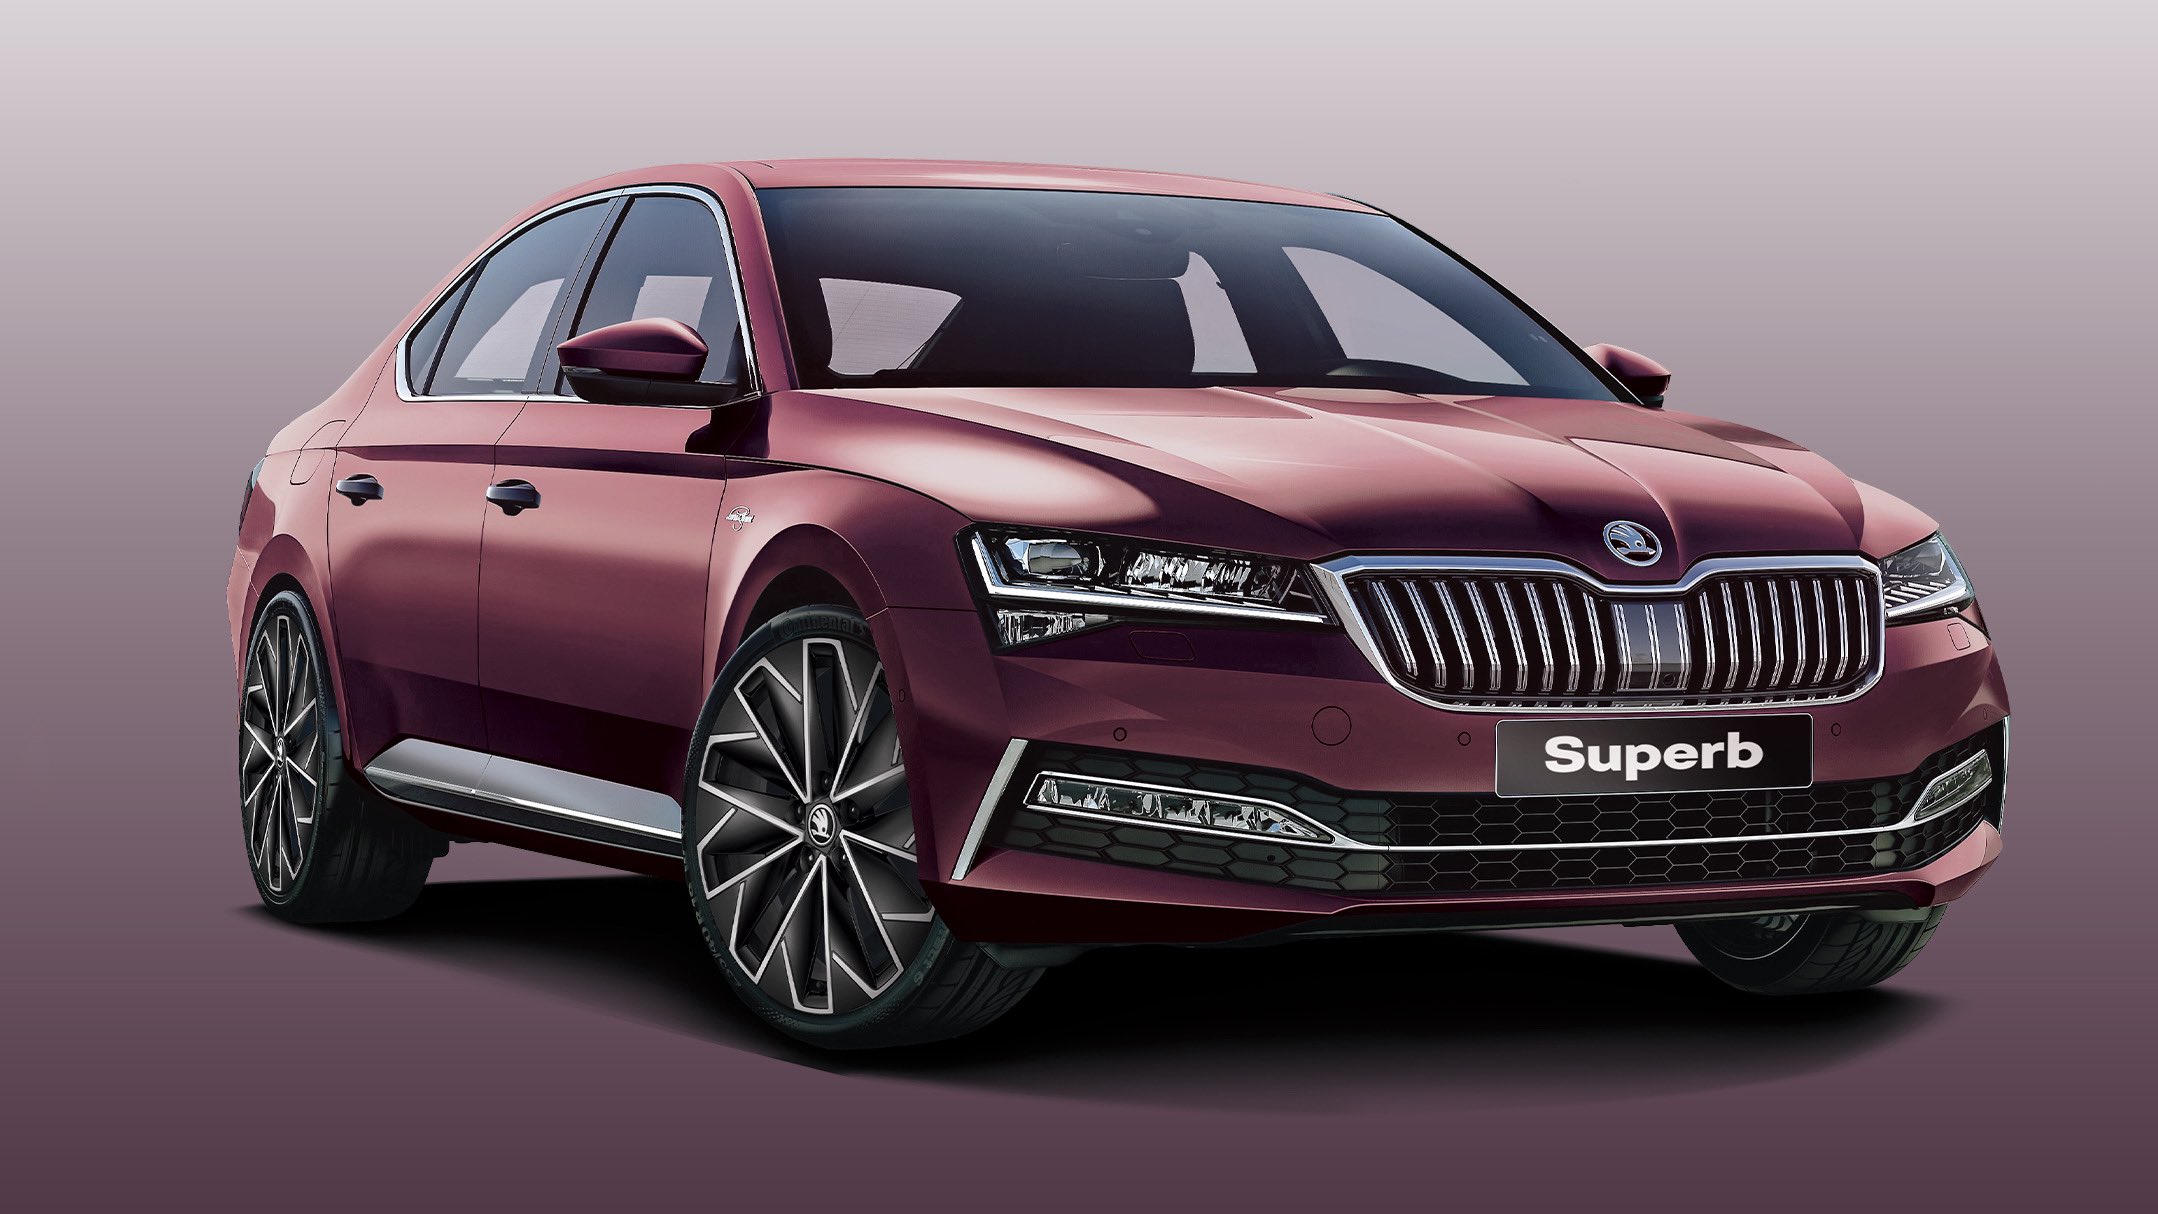 Skoda Re-Launched Superb In India At Rs. 54 Lakh